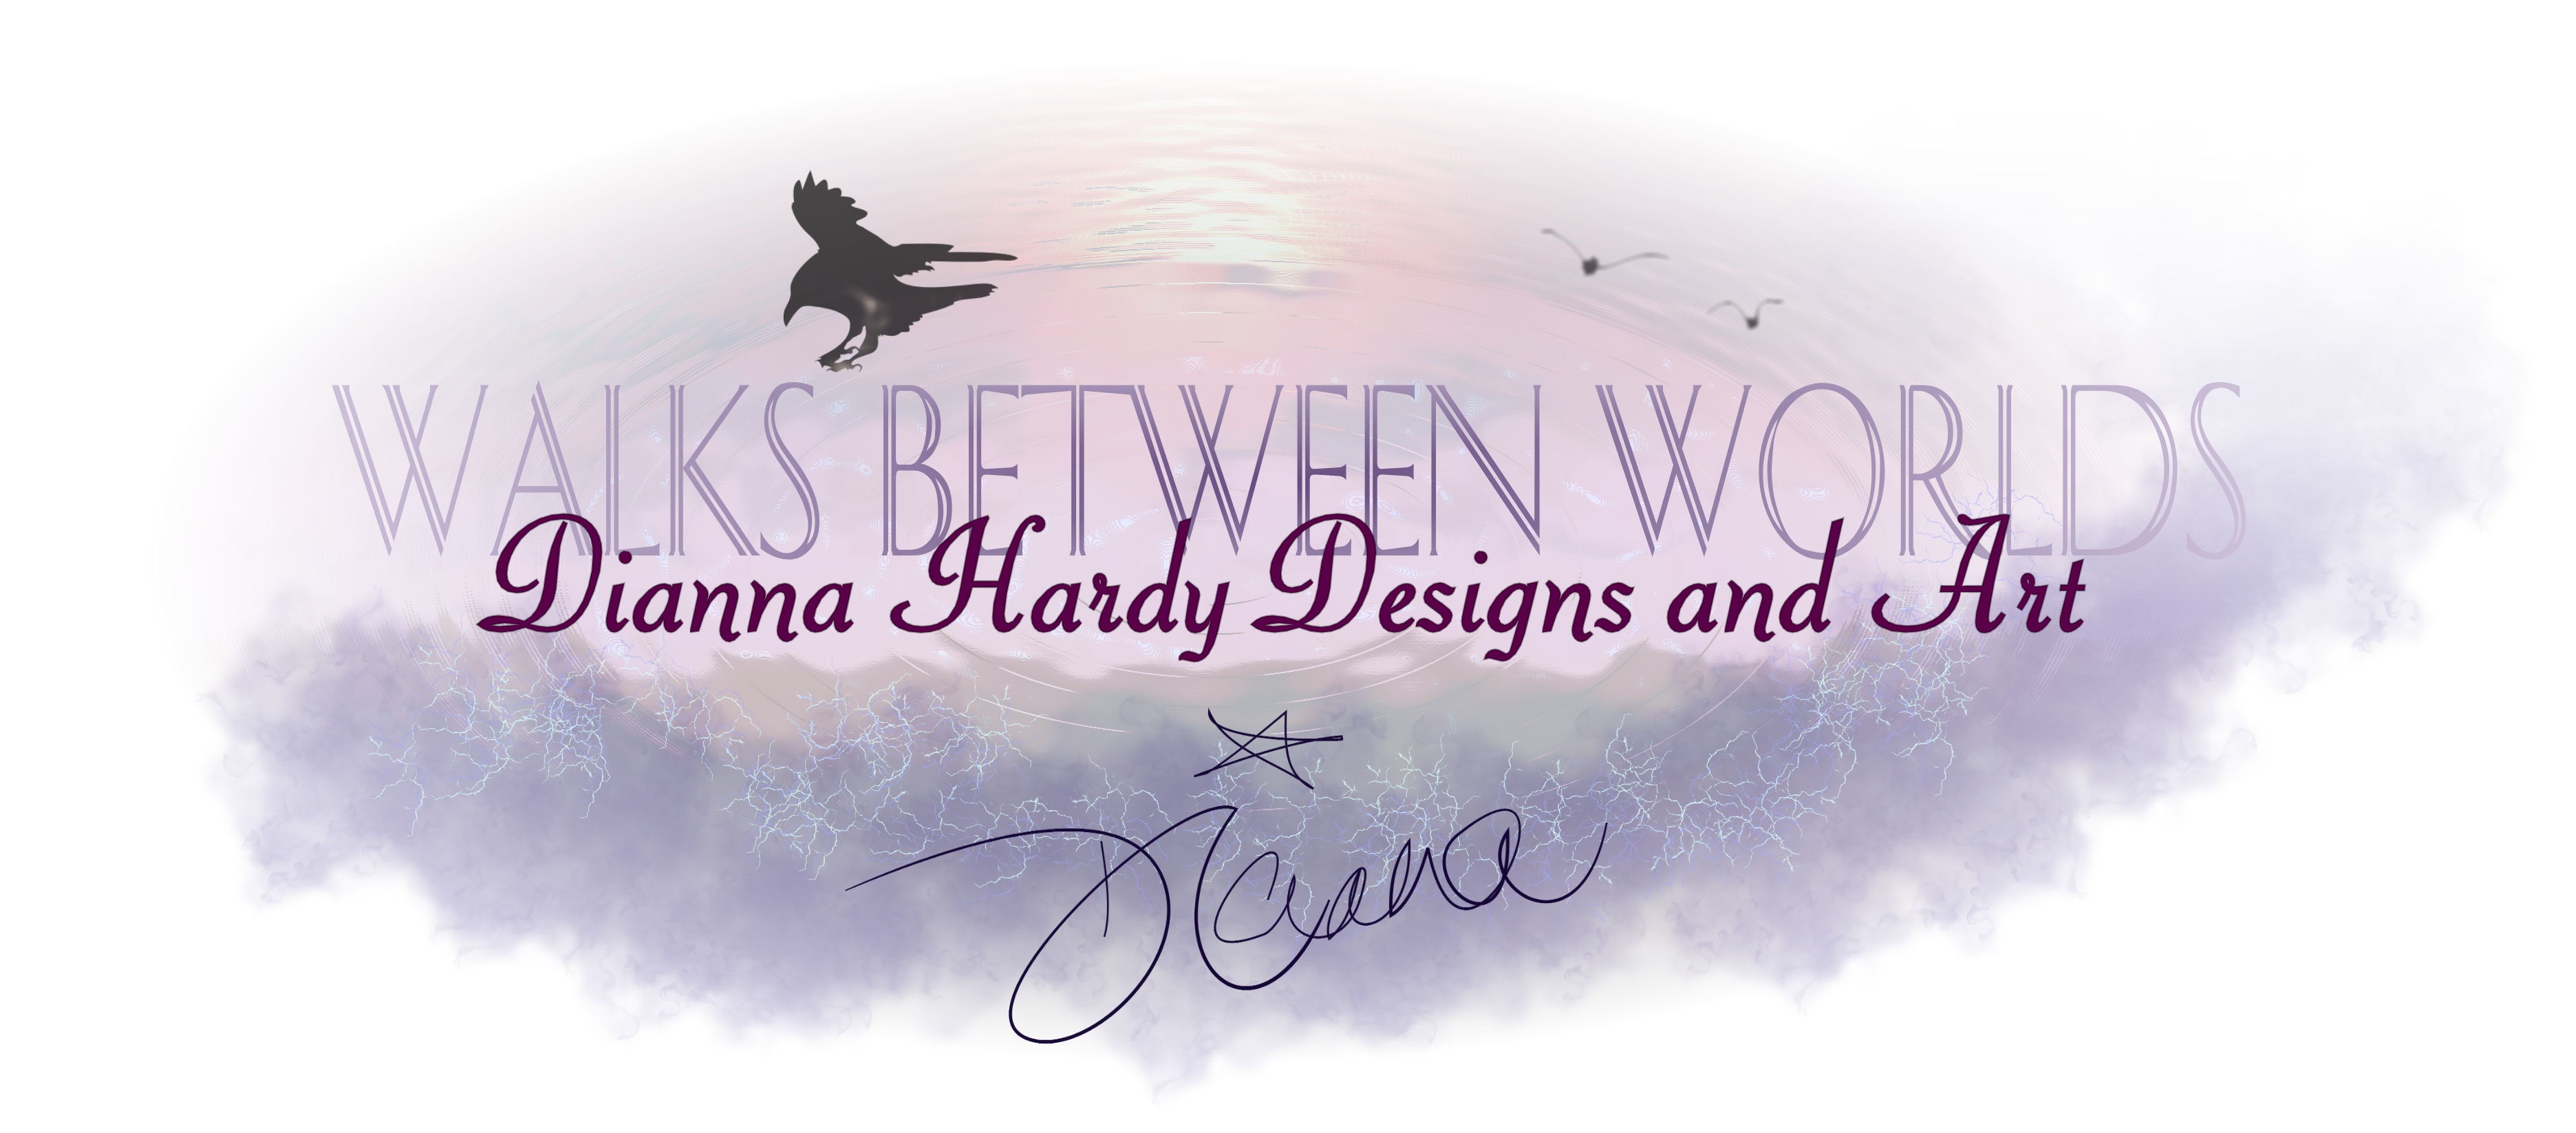 Walks Between Worlds, the home of Dianna Hardy designs and art.